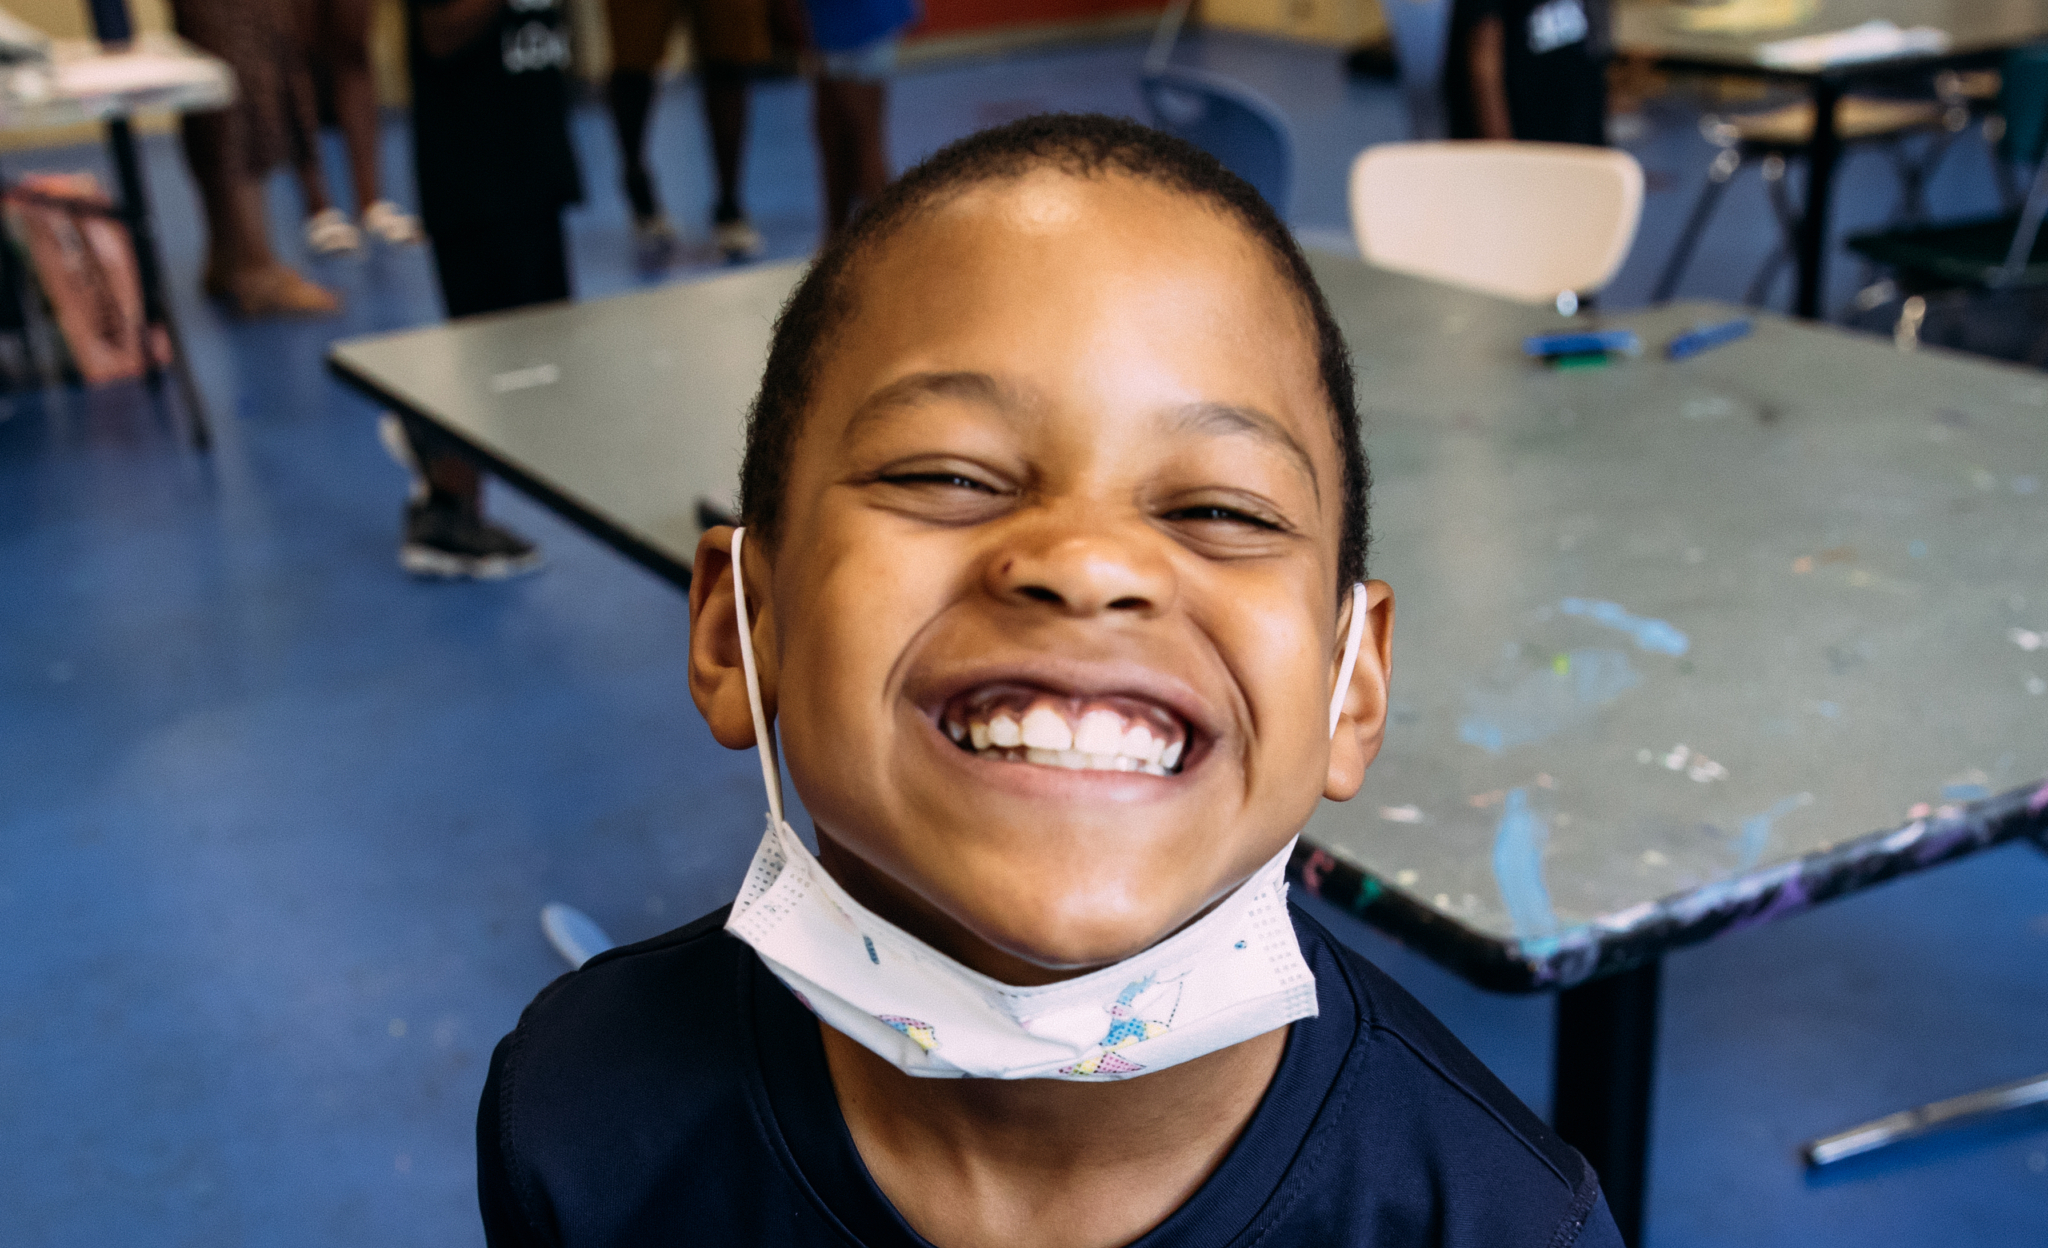 How Core Values Drive Boys & Girls Clubs of Boston